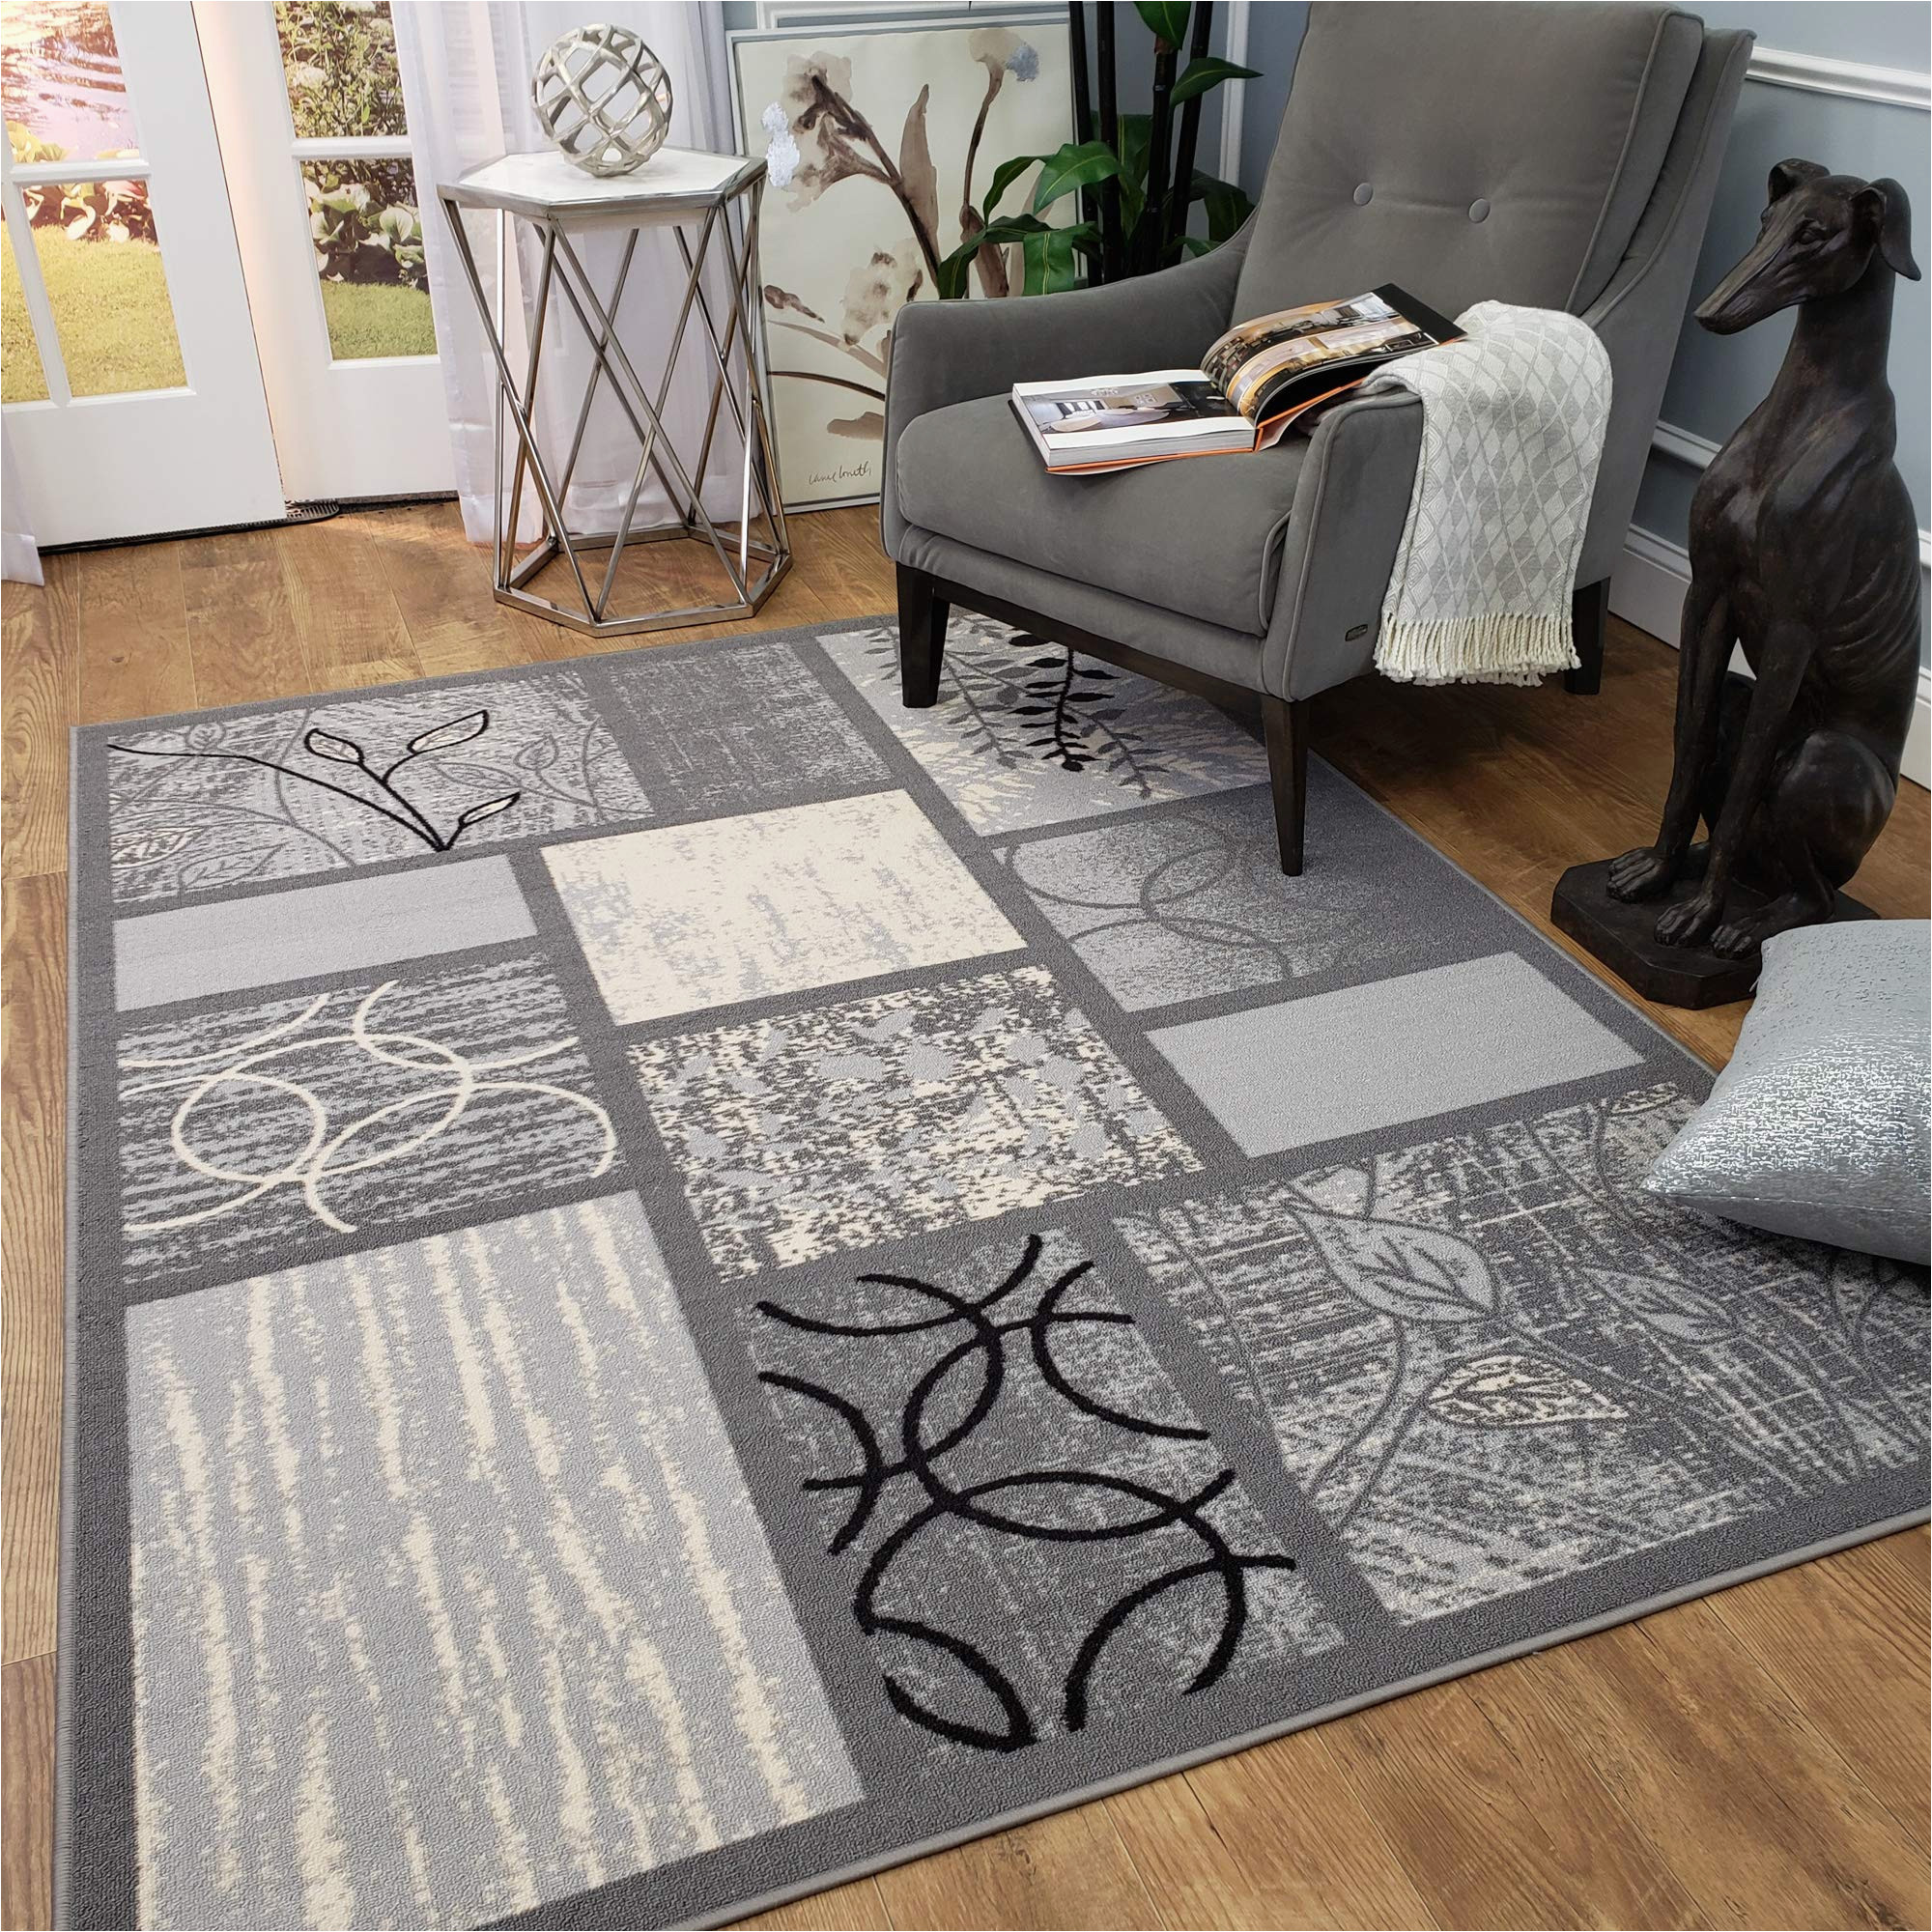 3×5 area Rugs On Sale Rubber Backed area Rug, 39 X 58 Inch (fits 3×5 area), Grey Geometric, Non Slip, Kitchen Rugs and Mats